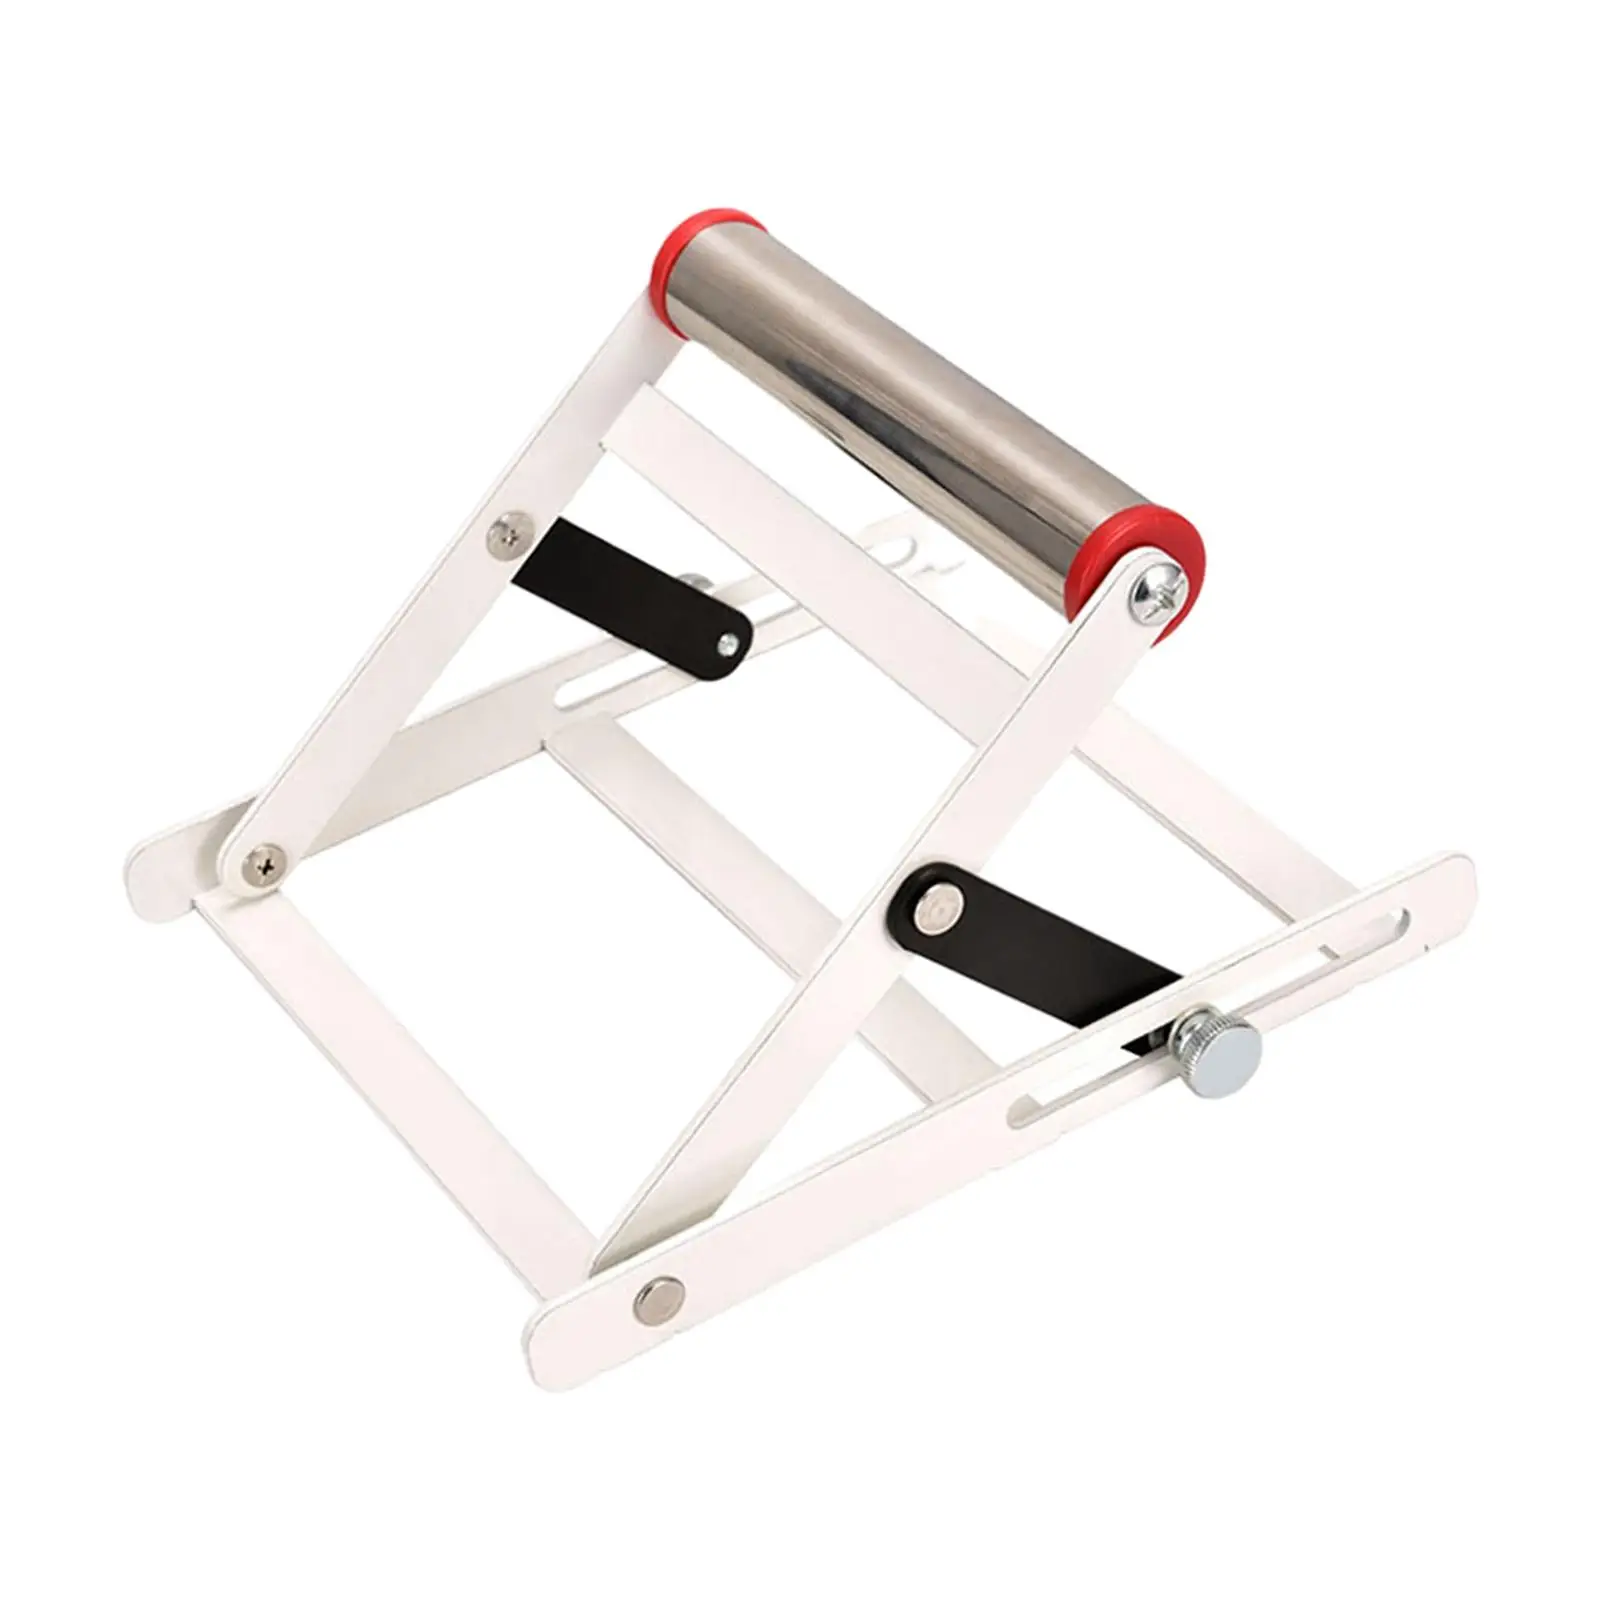 Cutting Machine Support Frame Work Support Stand for Professional Good Performance Accessory Practical Material Holding Rack